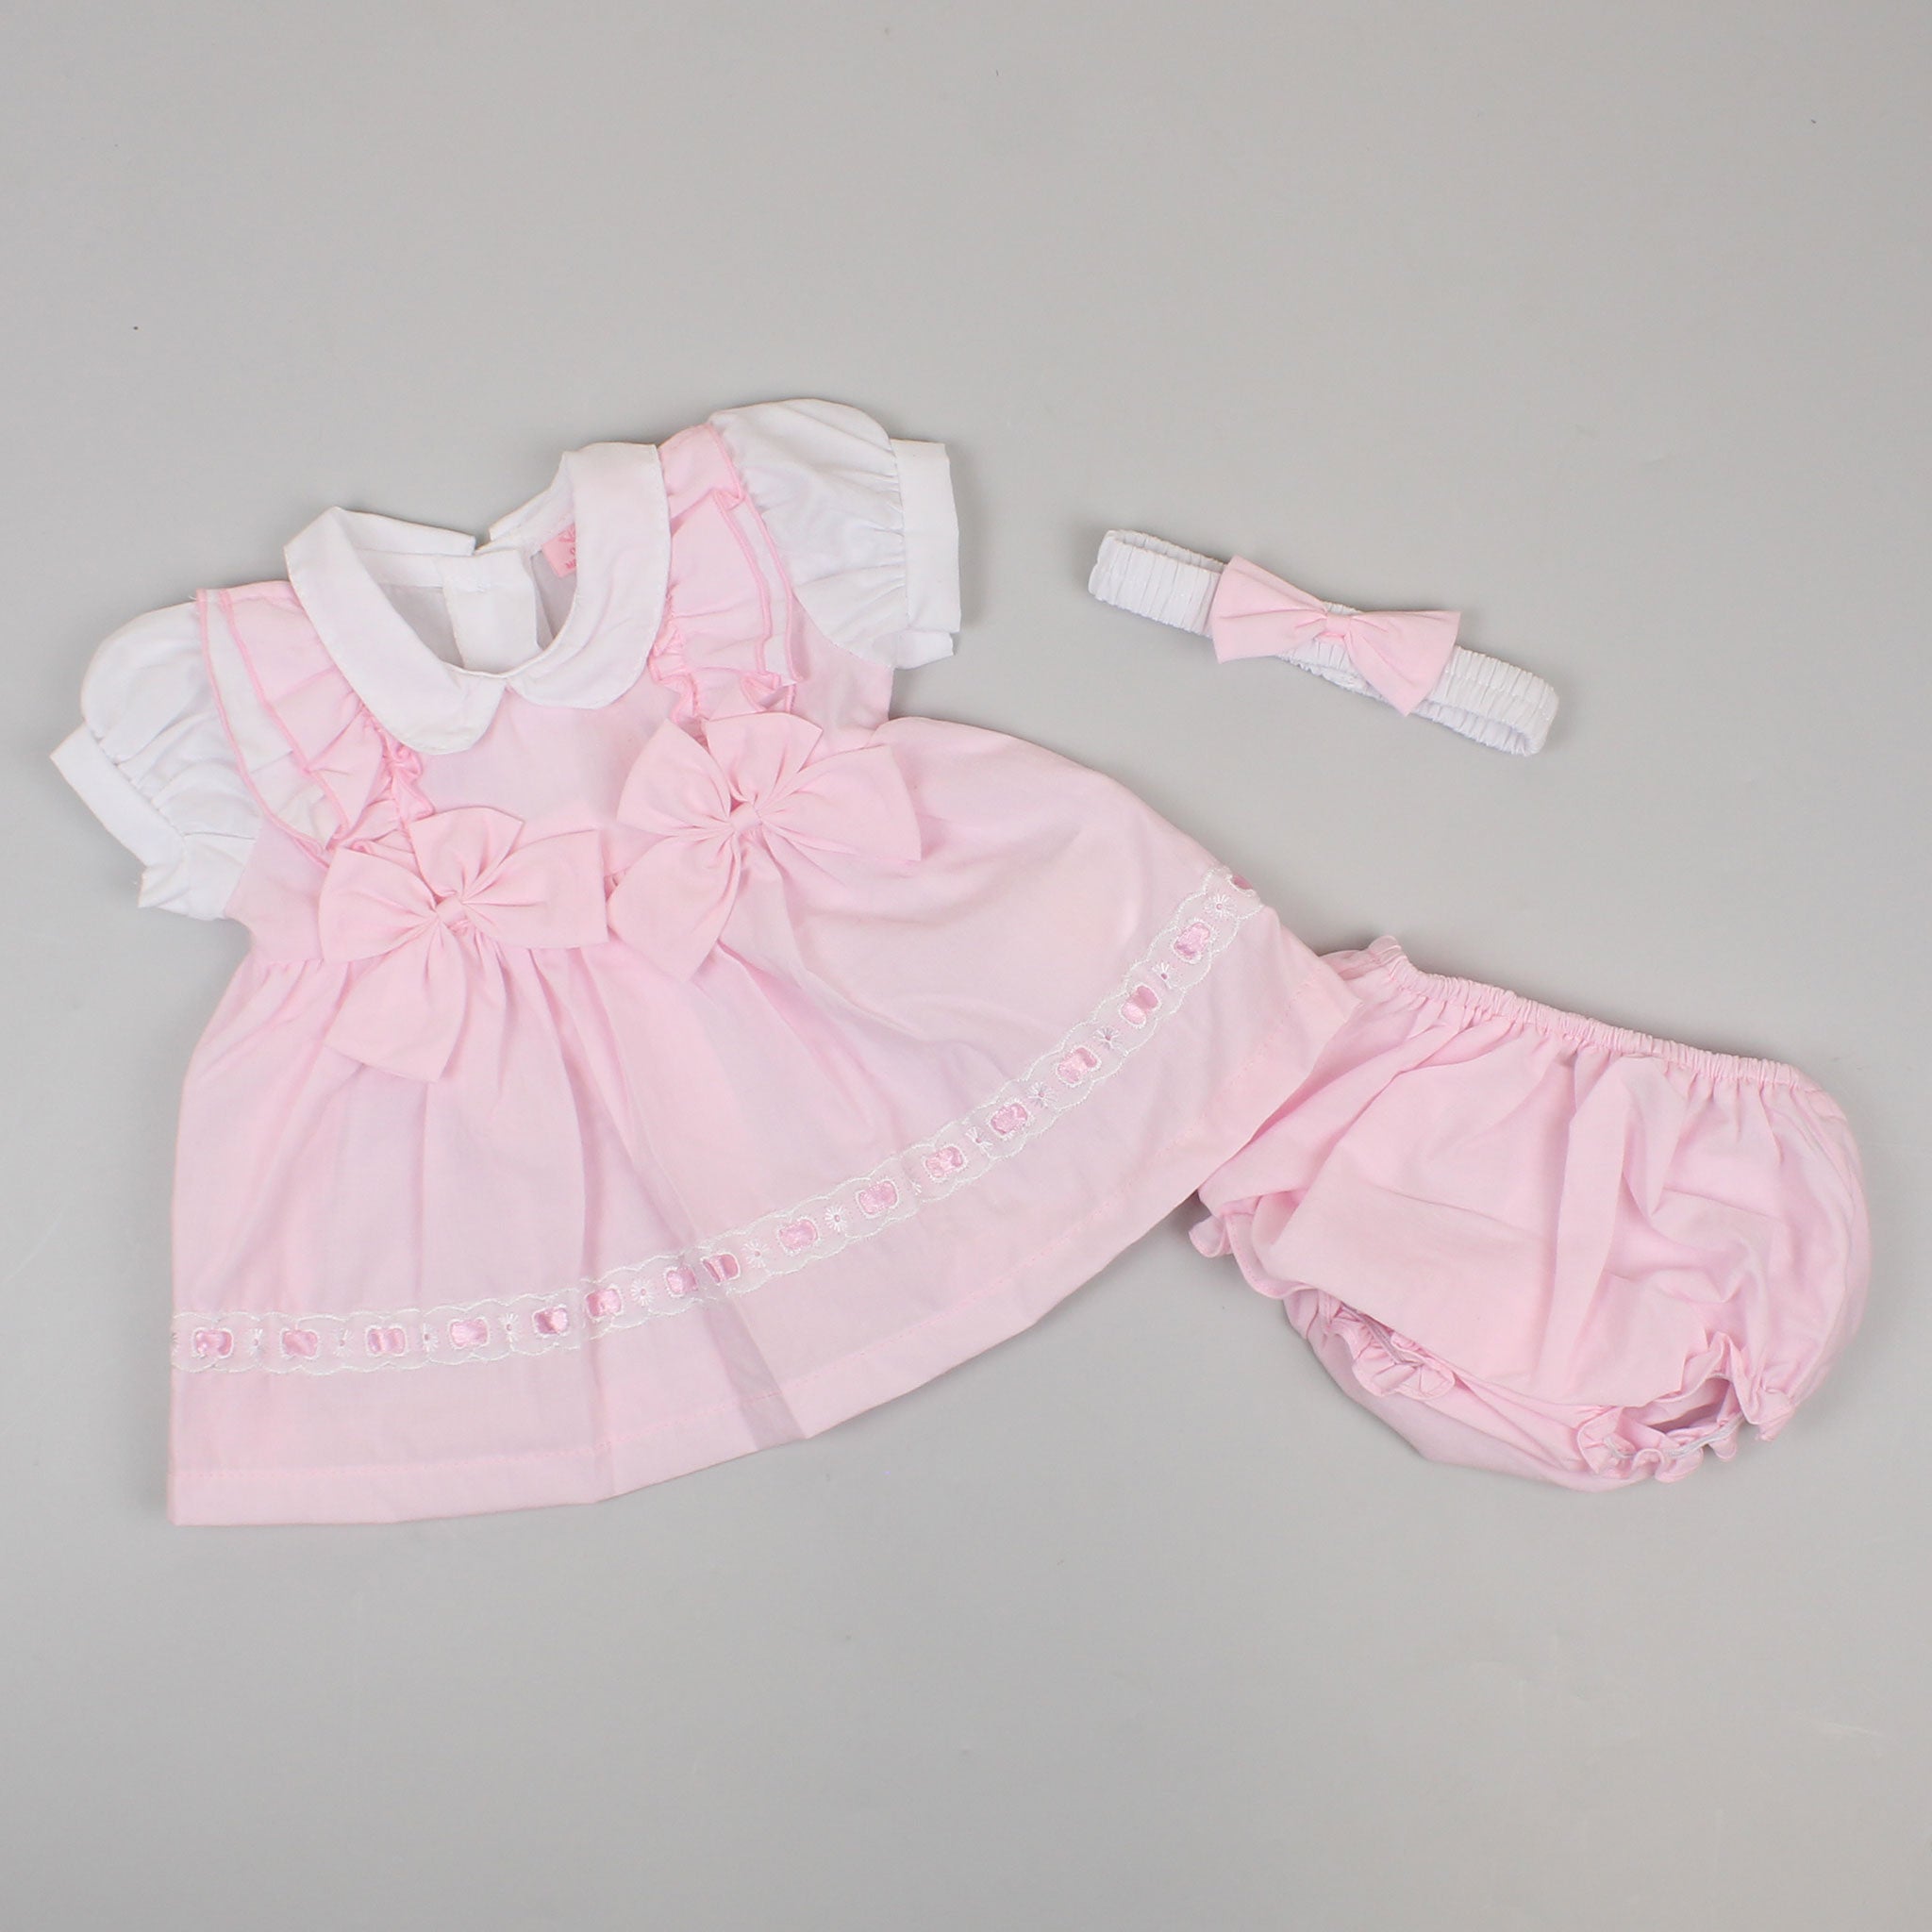 baby girls pink and white summer three piece with dress, pants and headband 